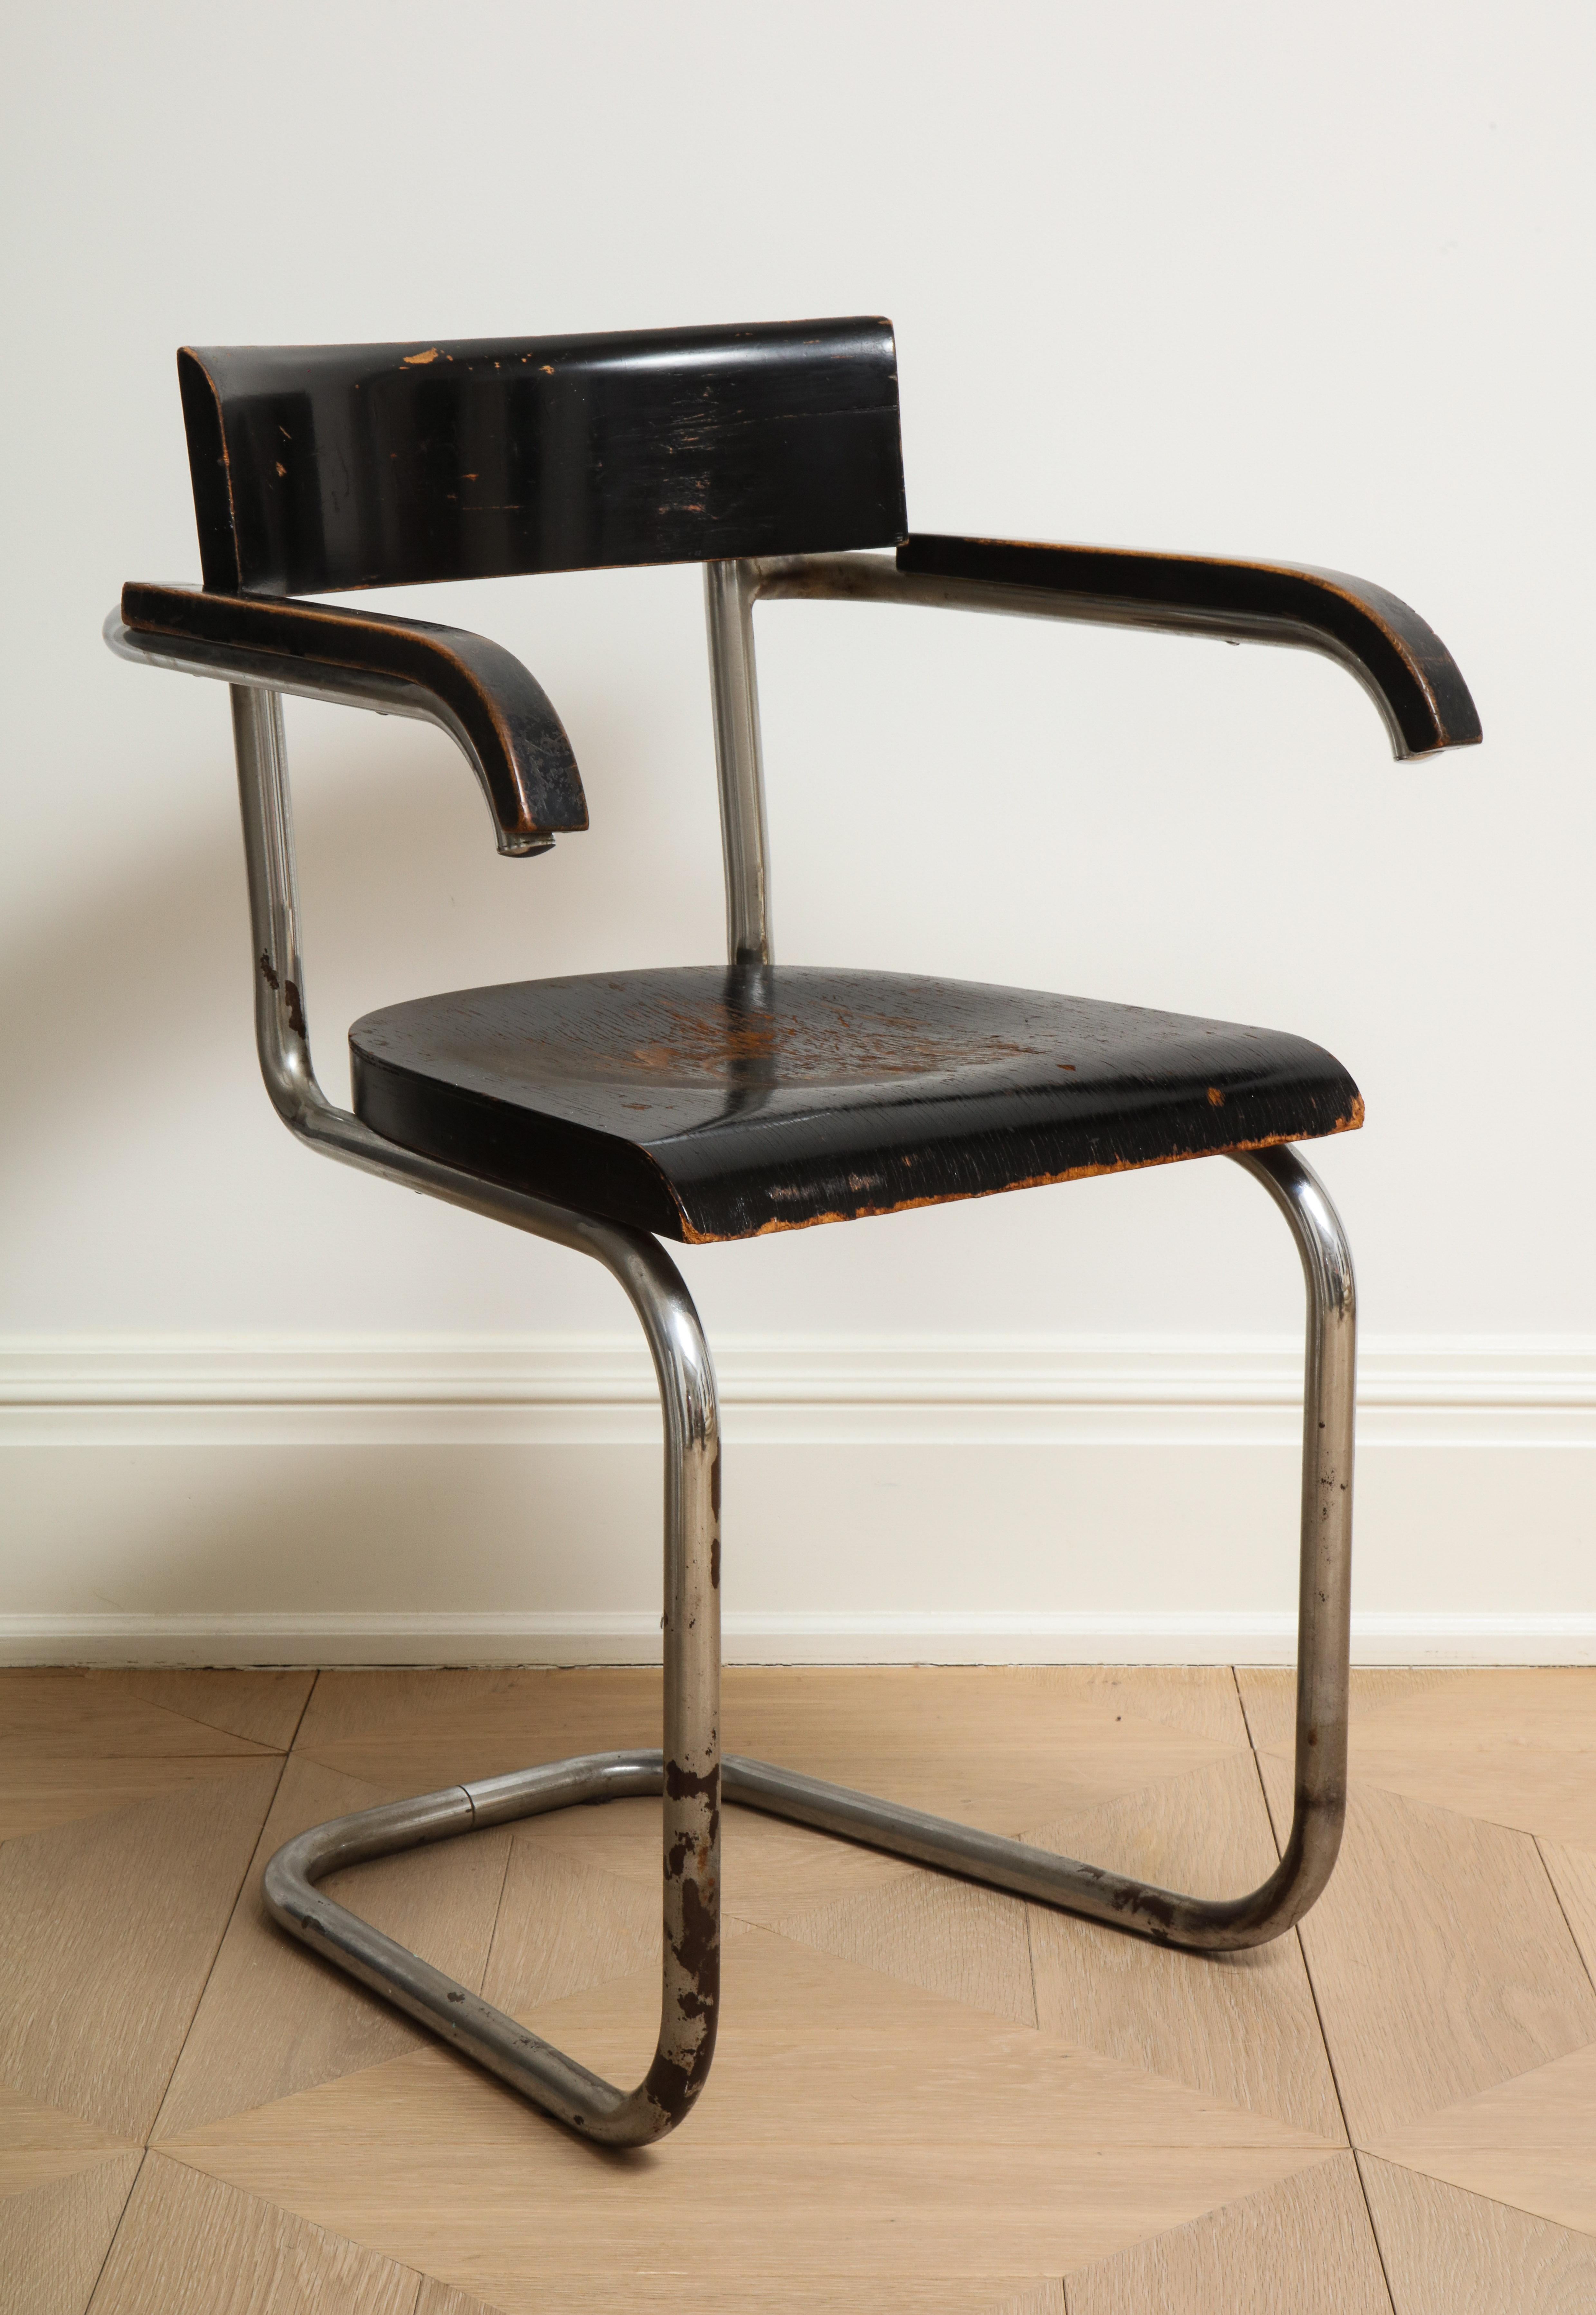 Bauhaus tubular chromed steel and ebonized beech armchair by Dutch designer Mart Stam for Thonet, 1932. The original wood finish has worn patches and there is some rust and losses in the chrome, all visible in the photos. 

Measures: Arm height